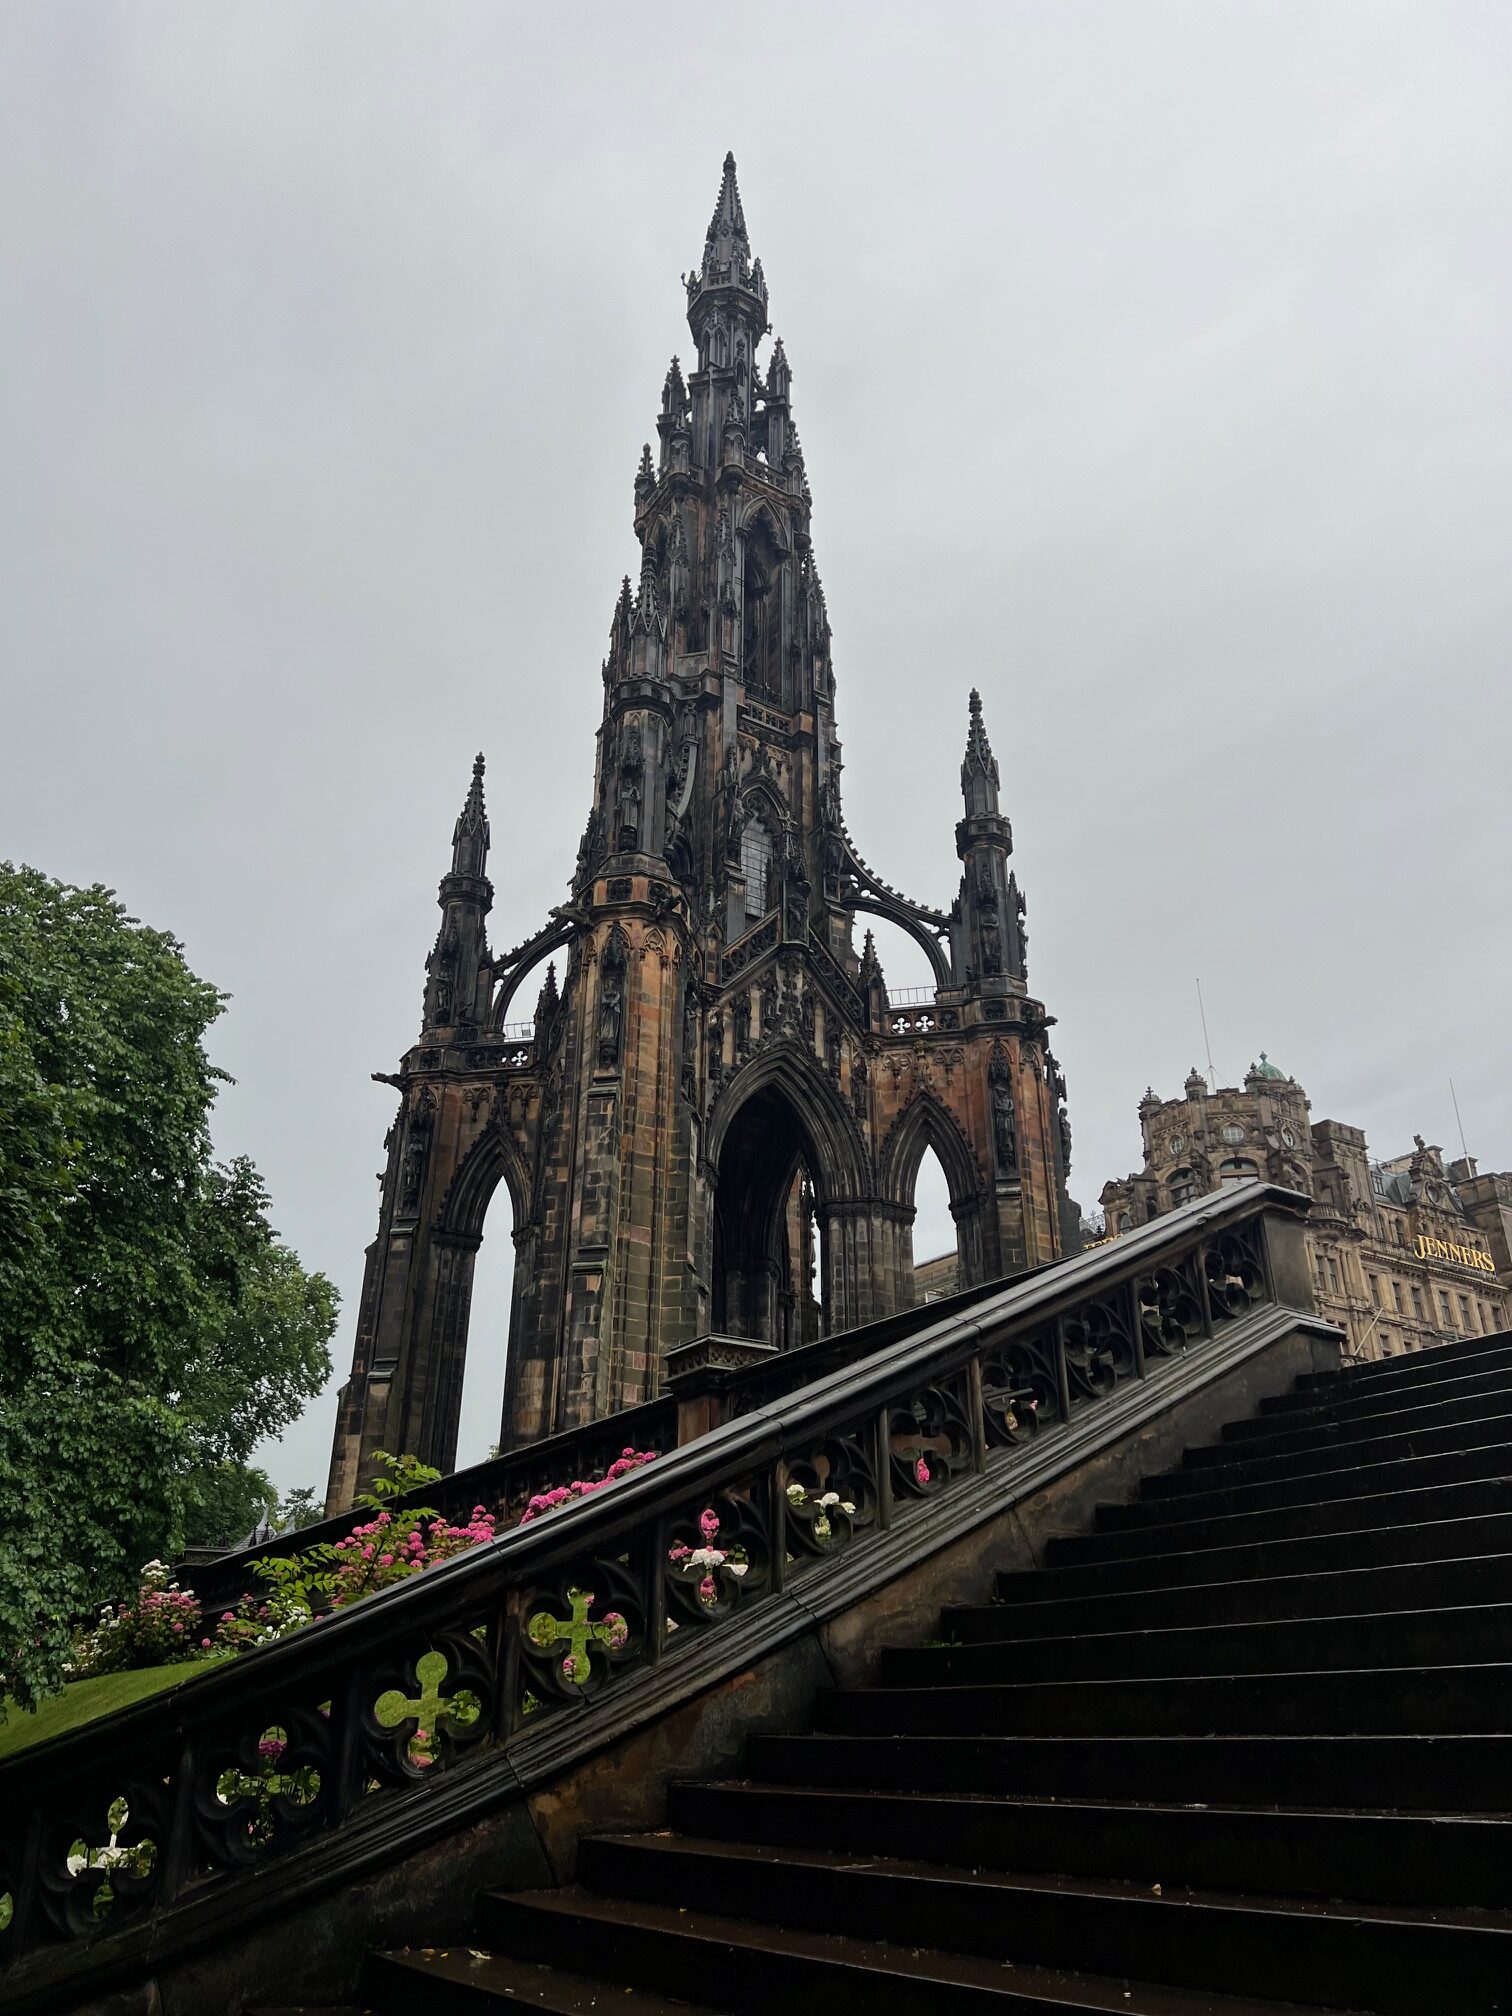 The Scott Monument is located in Princes Street Garden 